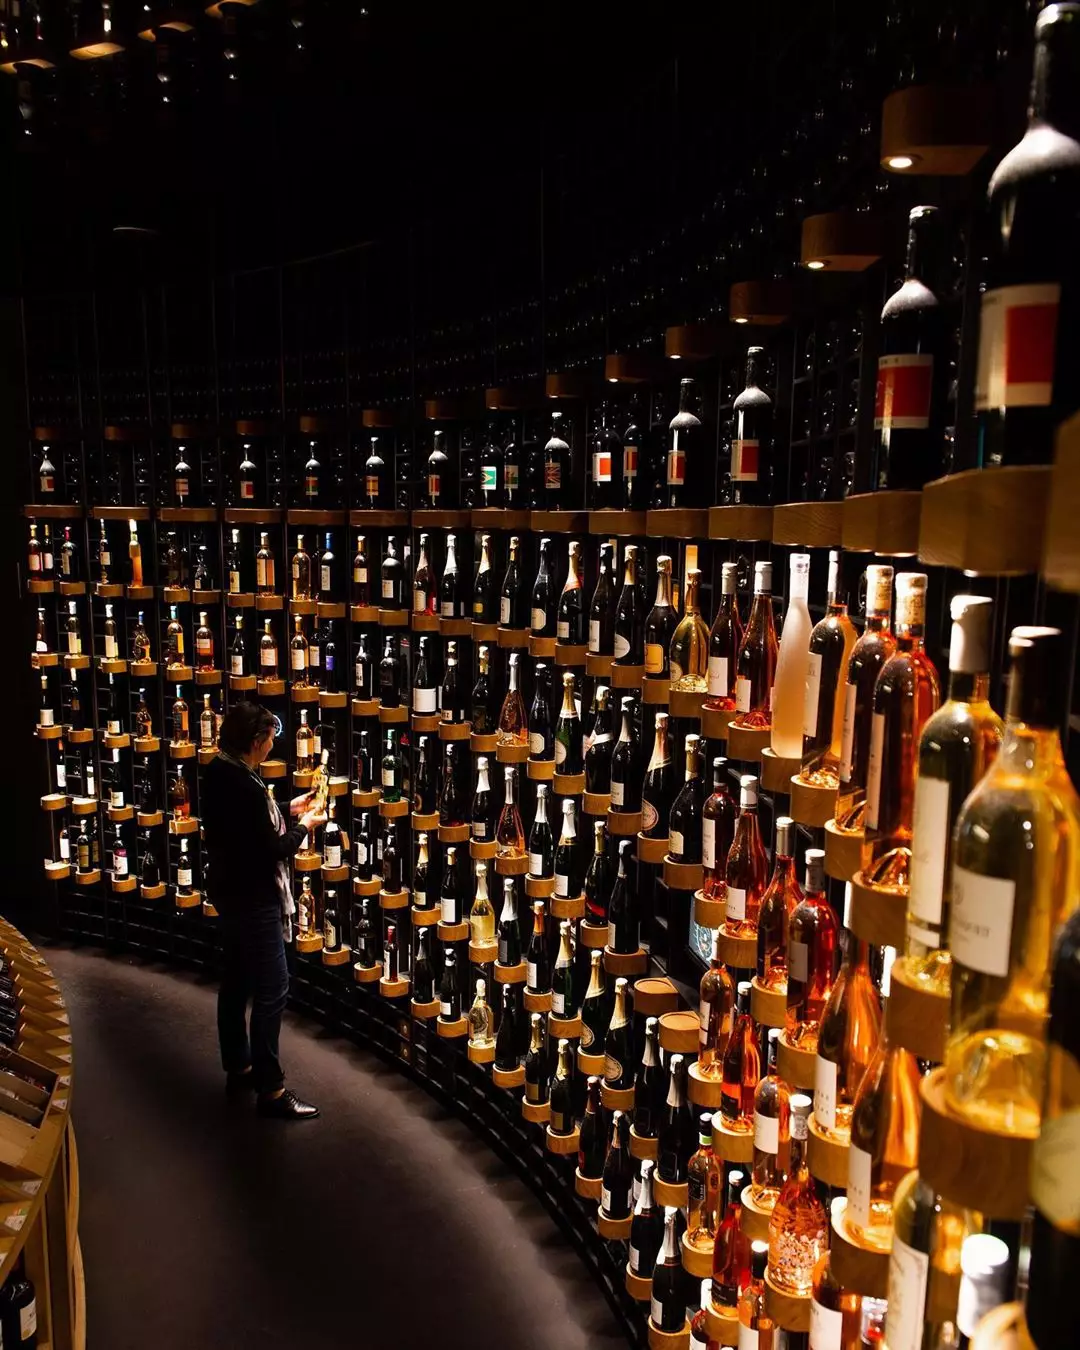 There are more than 14,000 bottle of booze to get stuck into.